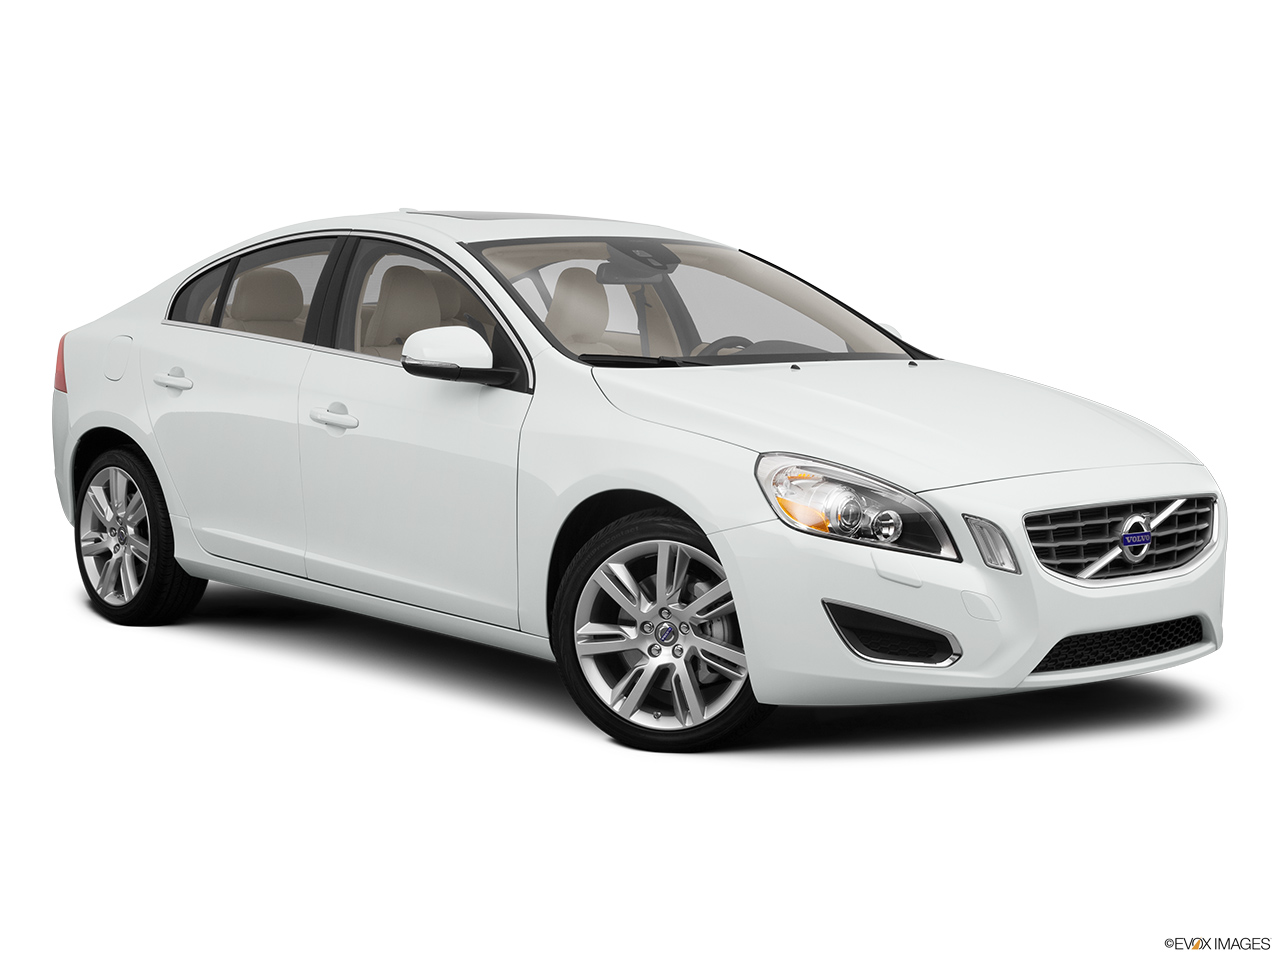 2011 Volvo S60 T6 A Front passenger 3/4 w/ wheels turned. 